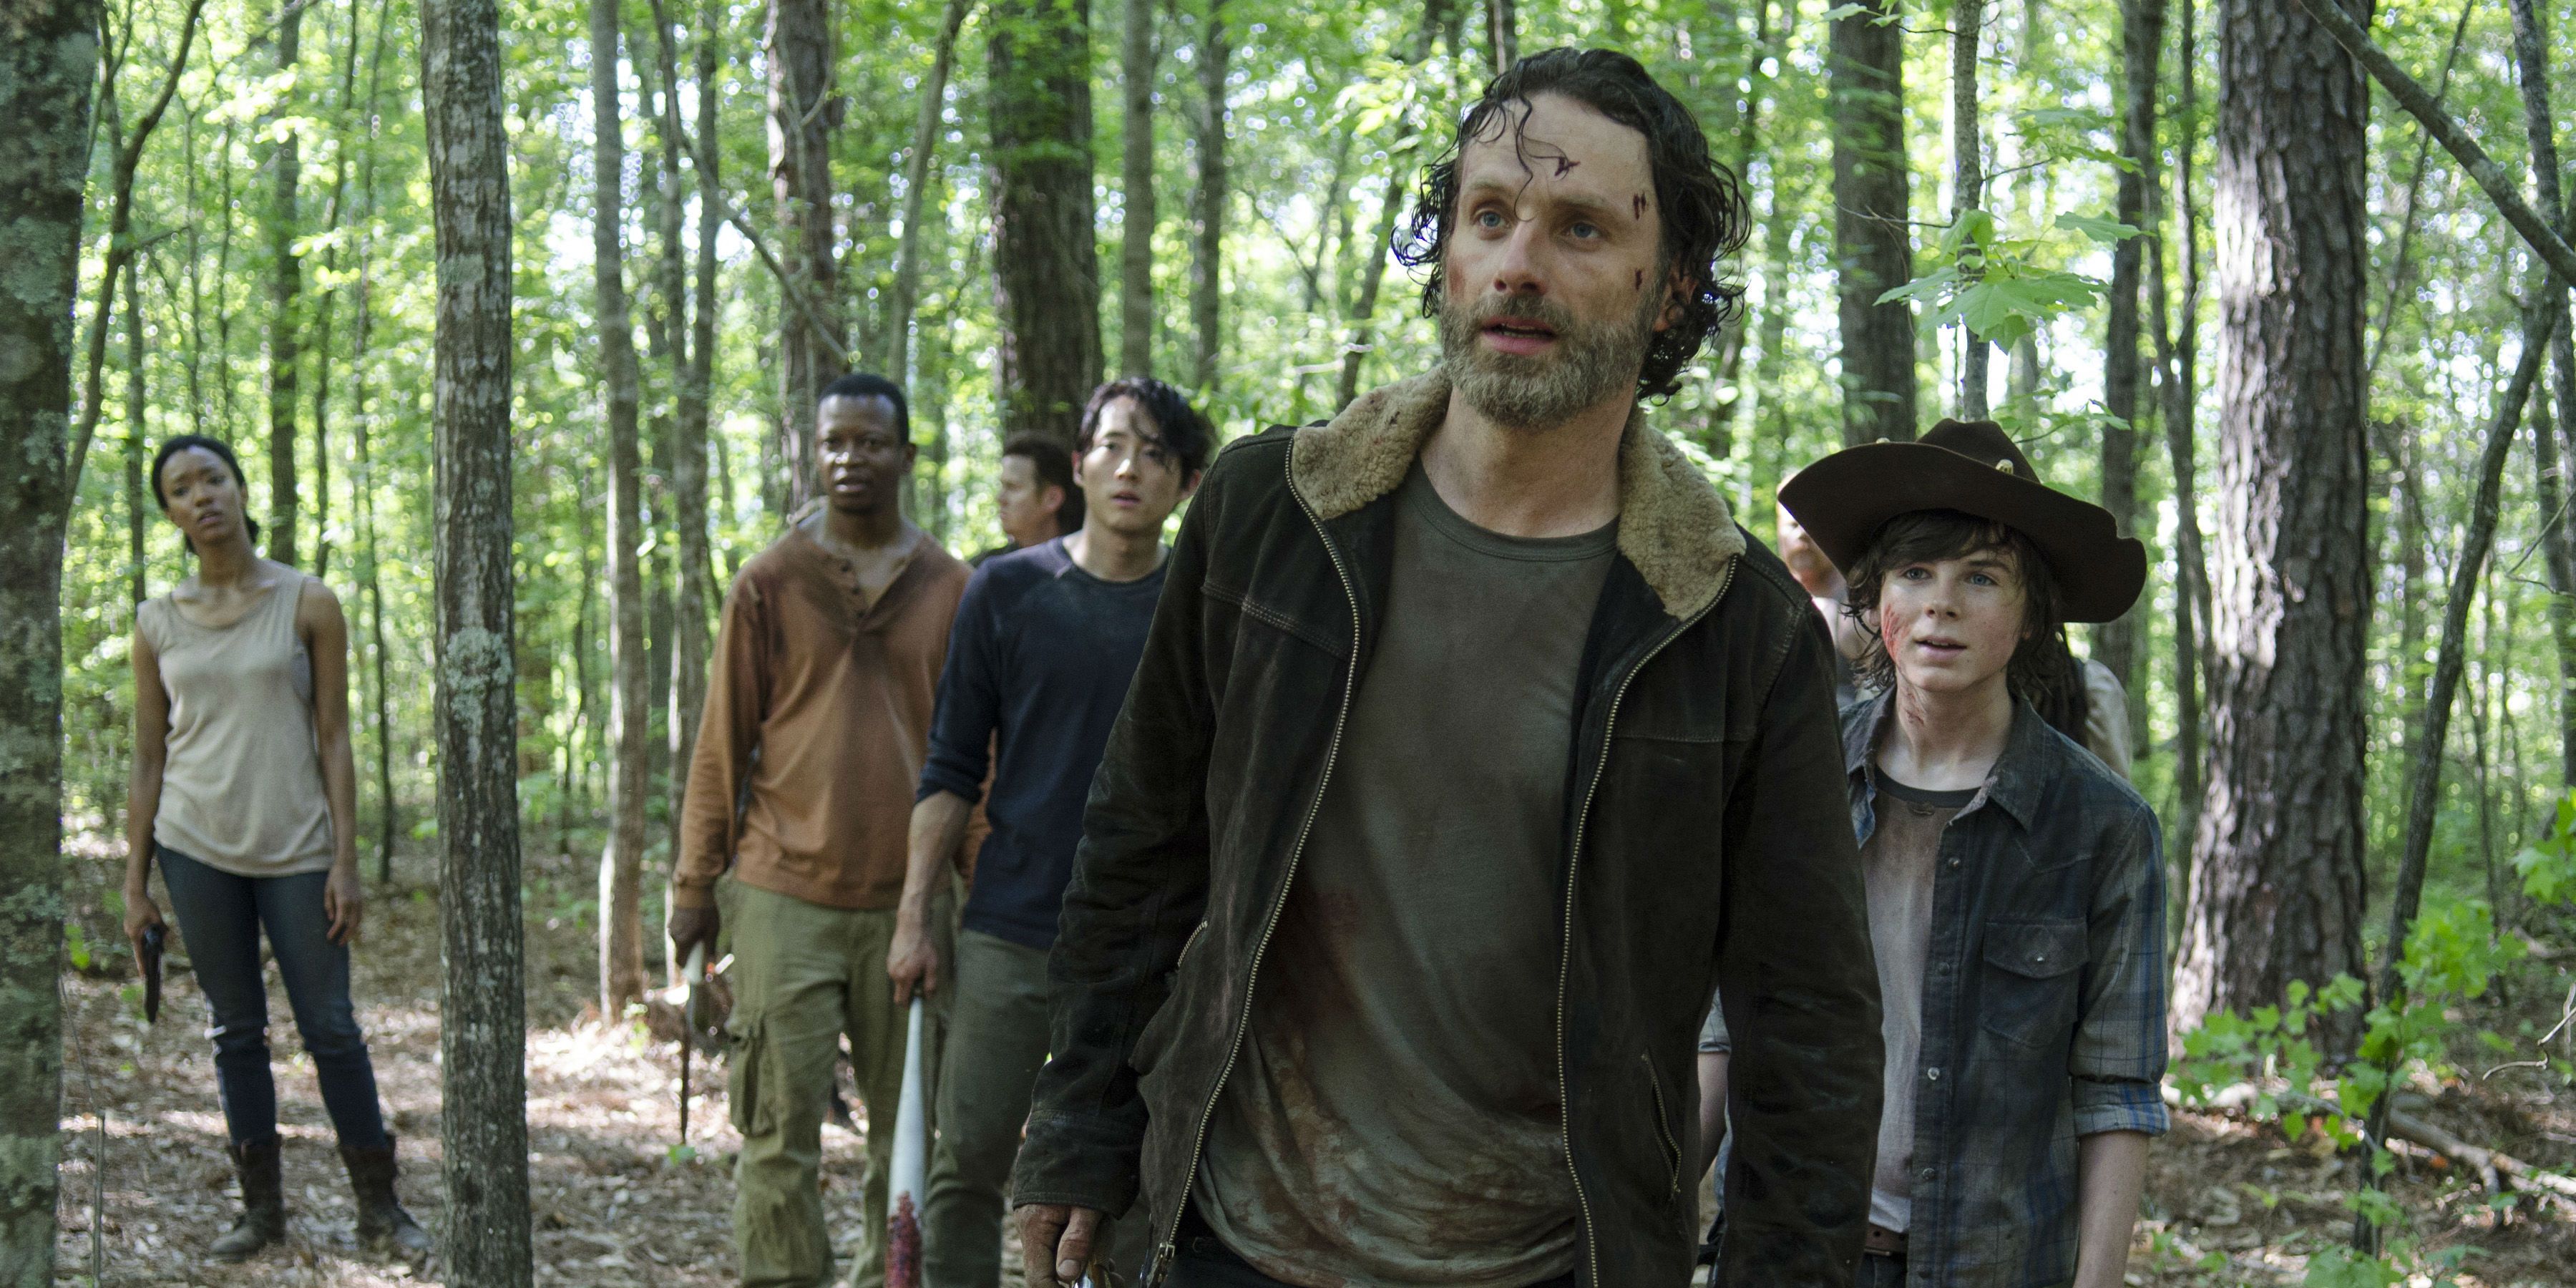 The Walking Dead Cast Led by Rick Grimes (Andrew Lincoln)